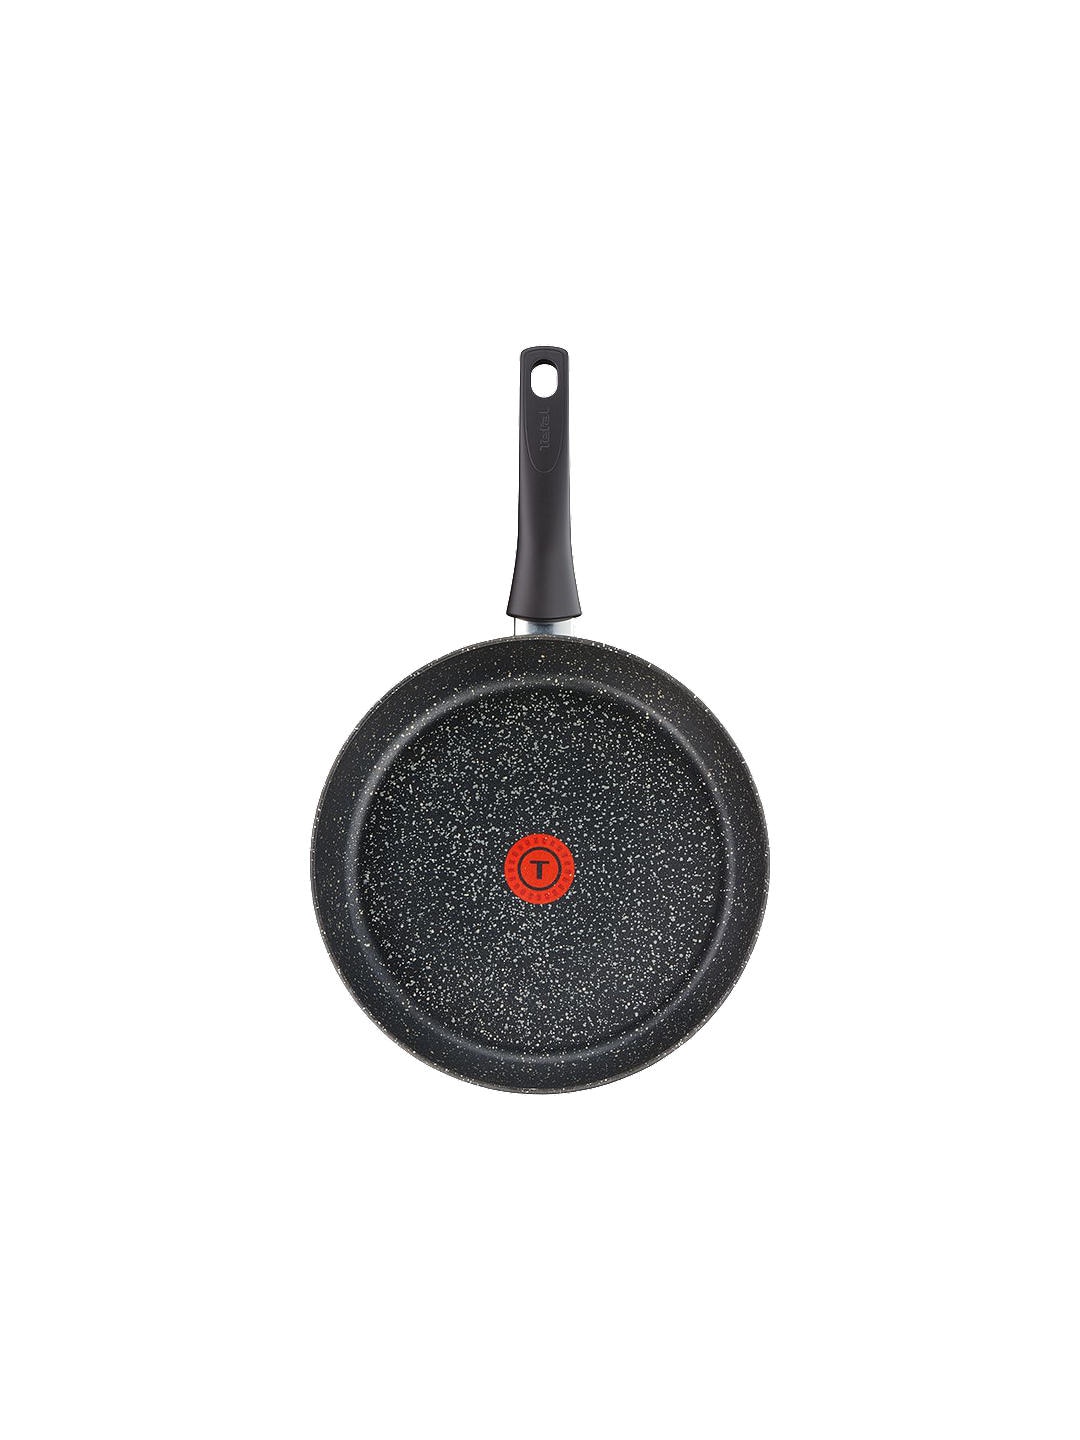 Chảo Tefal Authetic 20cm - Made In France